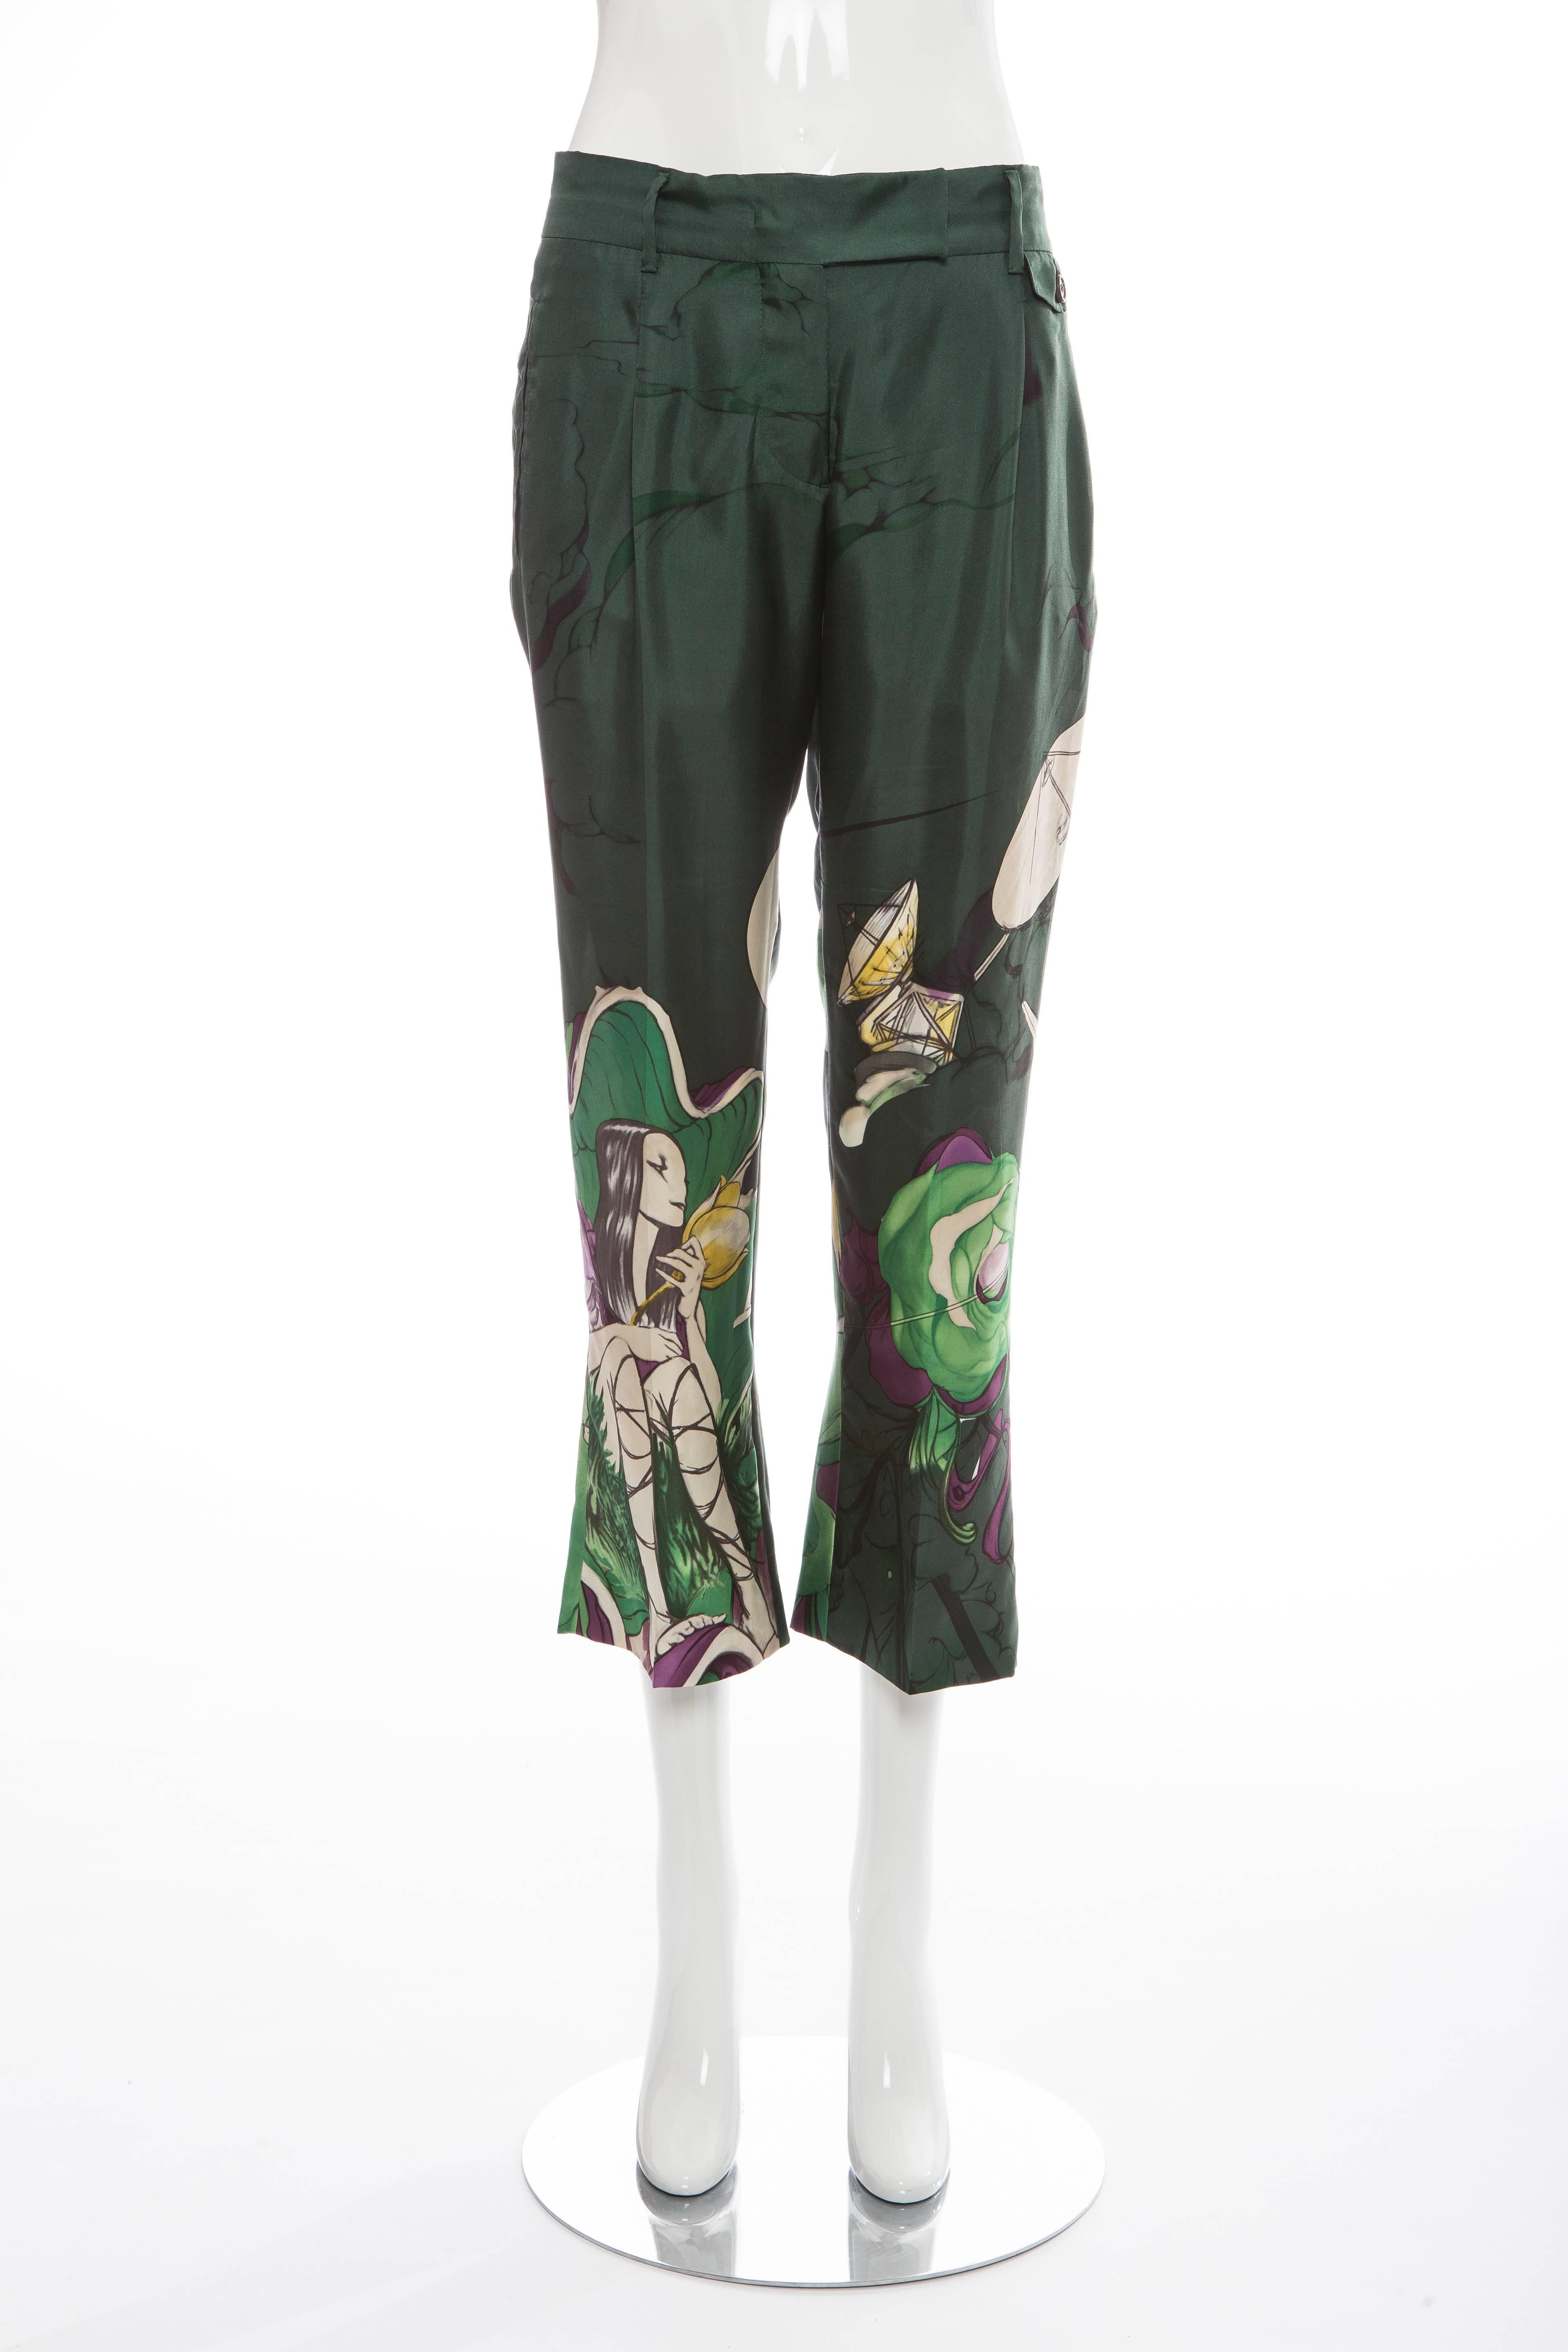 Prada, Spring/Summer 2008 silk cropped pants with four welt pockets featuring dual gusset pockets, James Jean fairy print throughout, hidden zip and hook-and-eye closures at front.

IT. 40
US. 4

Waist 33”, Hip 43”, Rise 10”, Inseam 27”, Leg